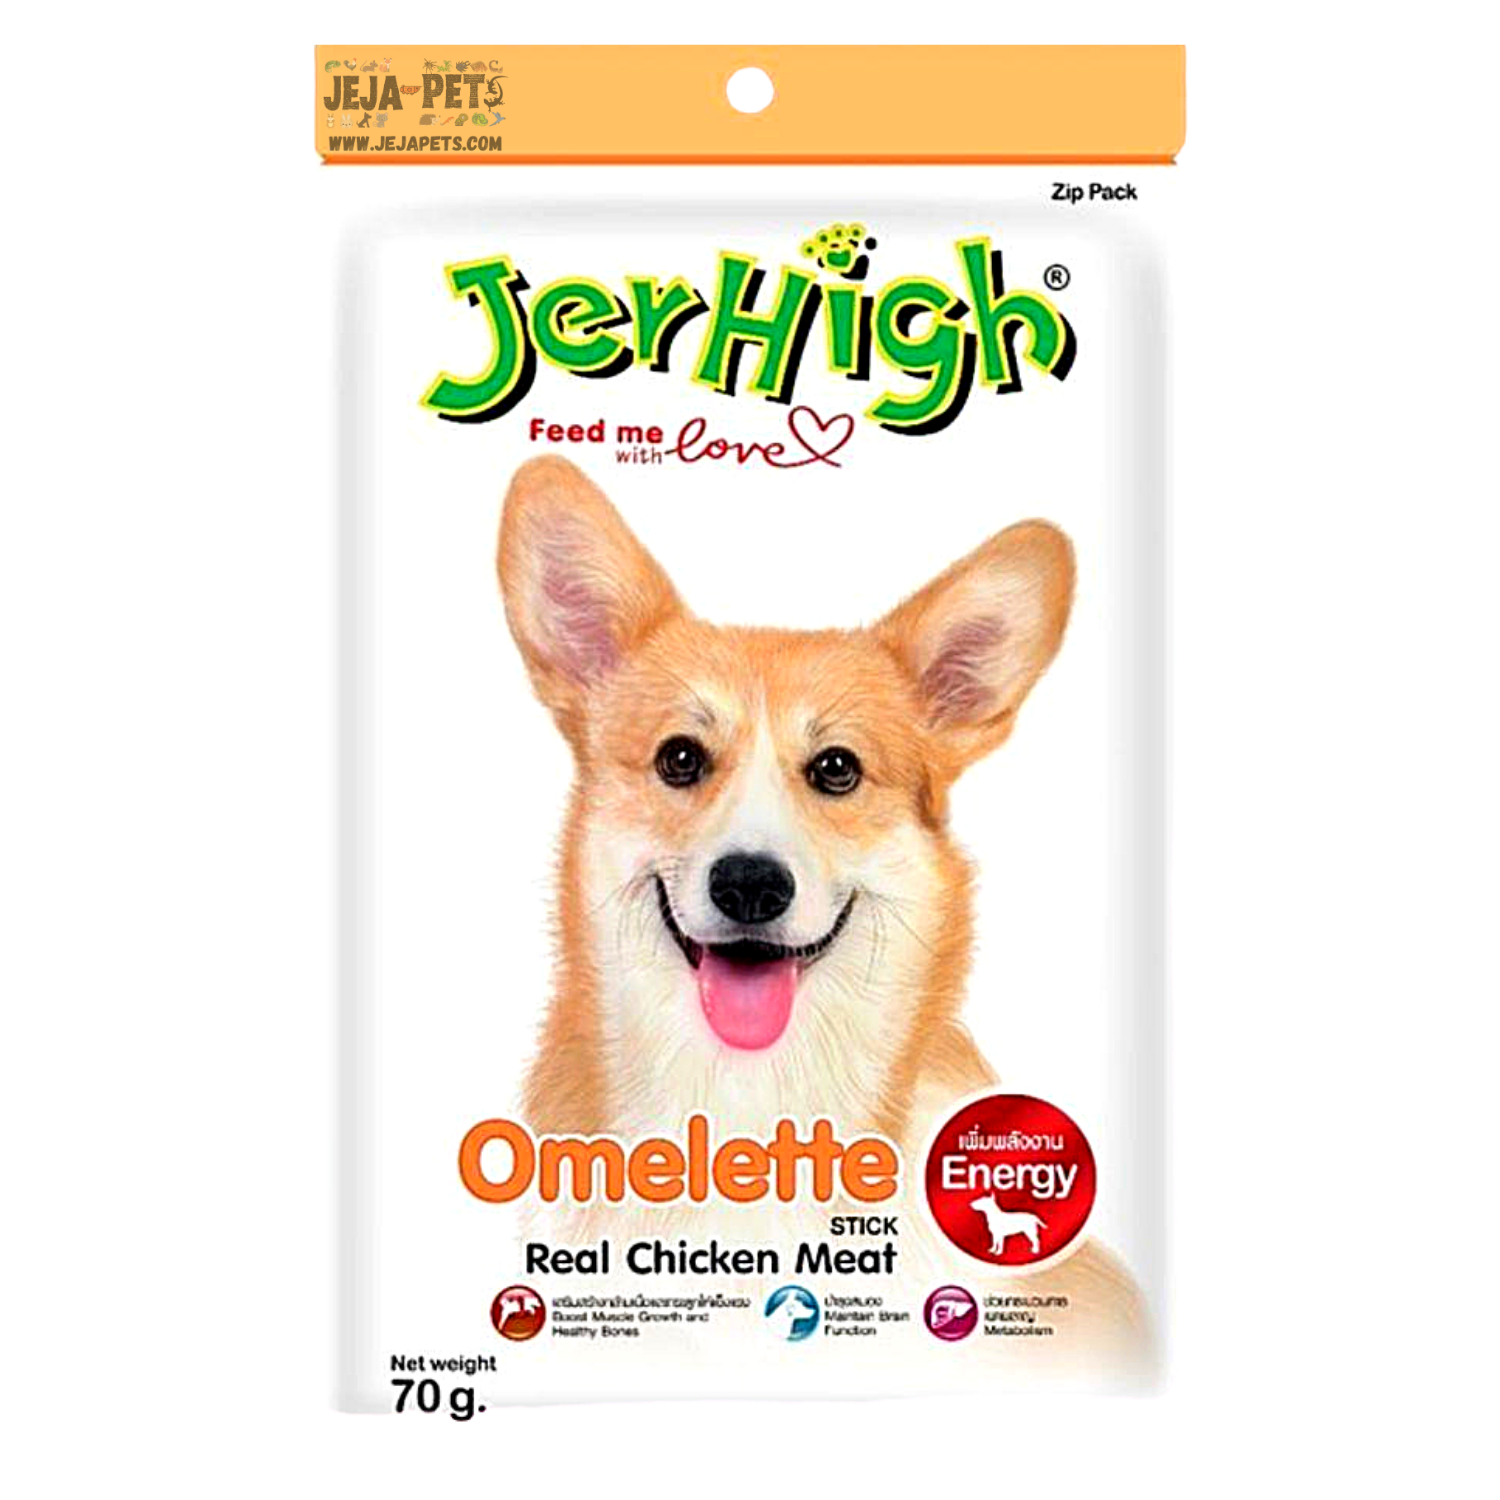 JerHigh Omelette Stick with Real Chicken Meat Dog Snack - 70g